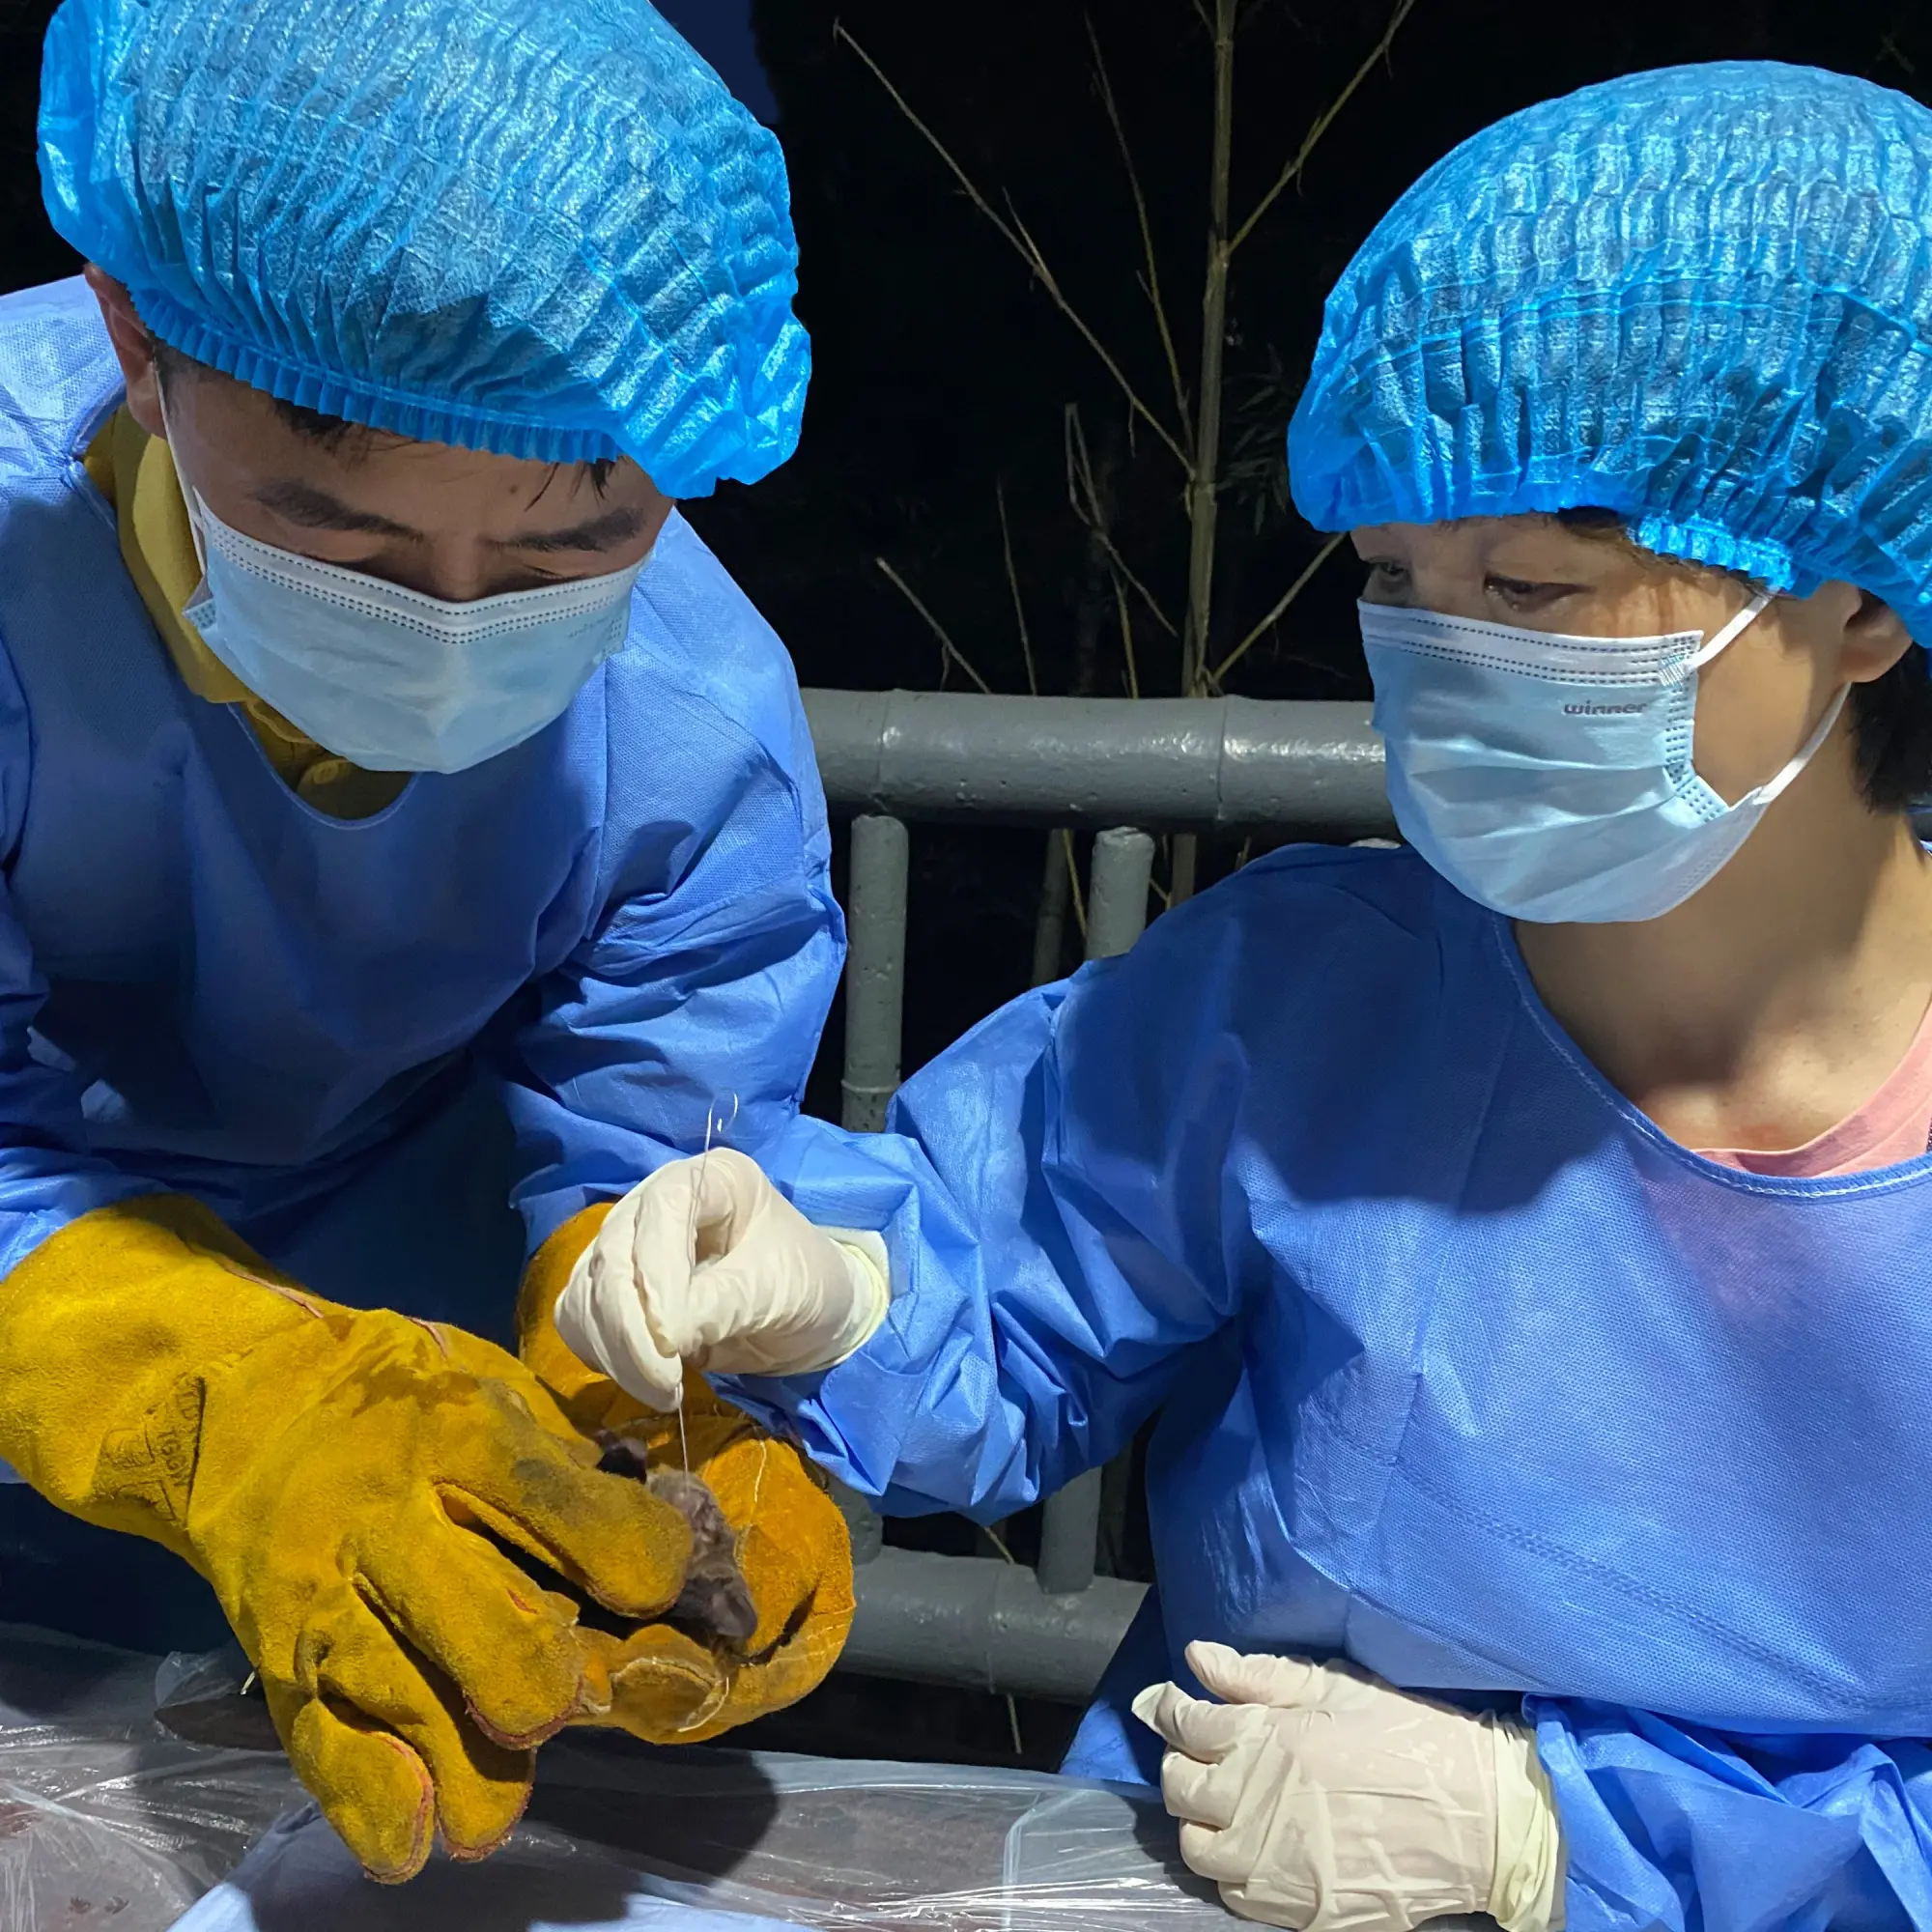 A close-up of two scientists in medical gear testing a small bat.